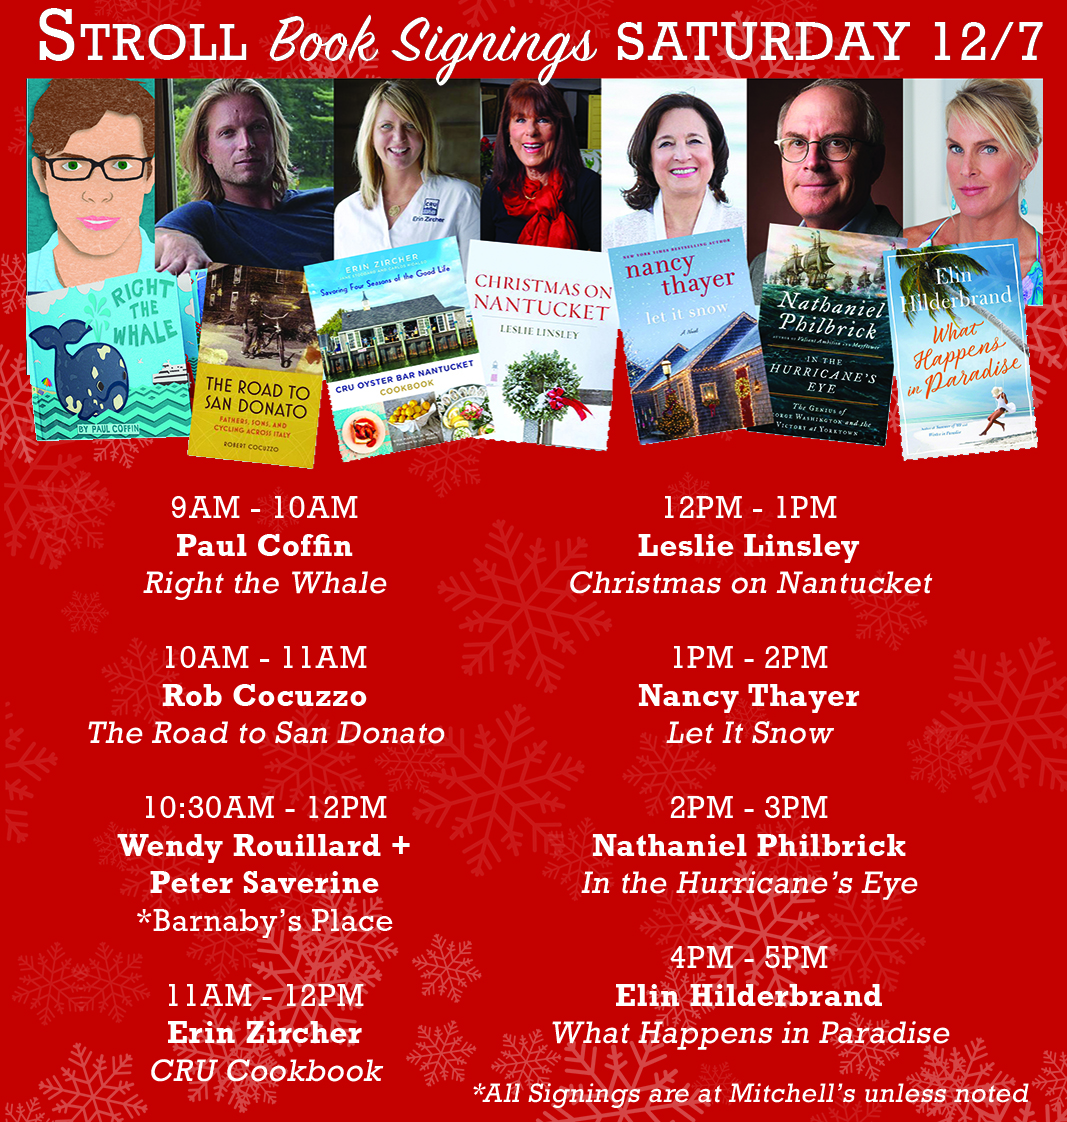 I'm looking forward to the annual #NantucketChristmasStroll this weekend. Come see me for a book signing at @Mitchells_MBC Sat 12/7, 2pm. Signed books make great gifts! See a full list of the weekend's festivities: ow.ly/tzhu50xpVPe